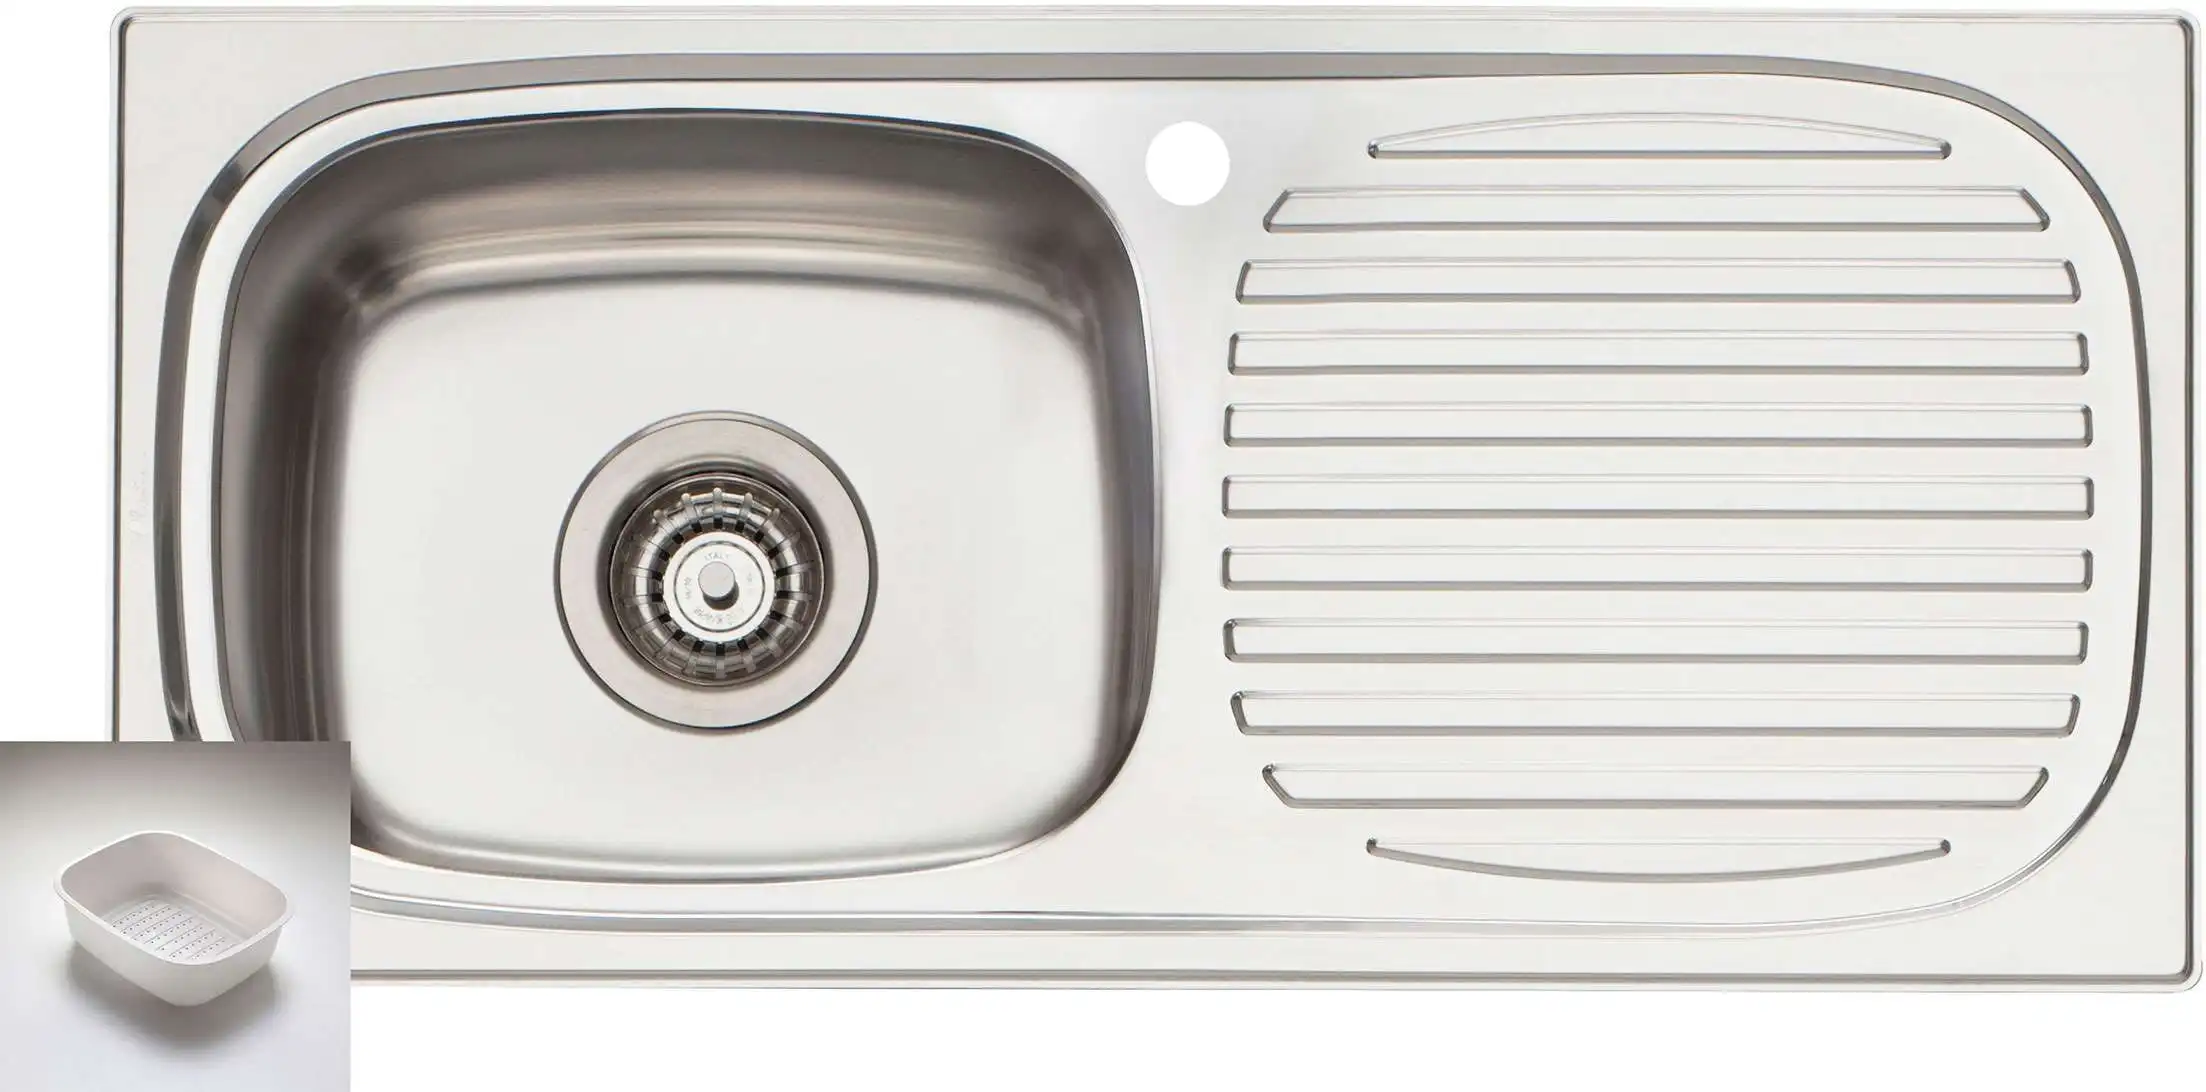 Oliveri Martini Single Left Hand Bowl Inset Sink With Drainer MR501